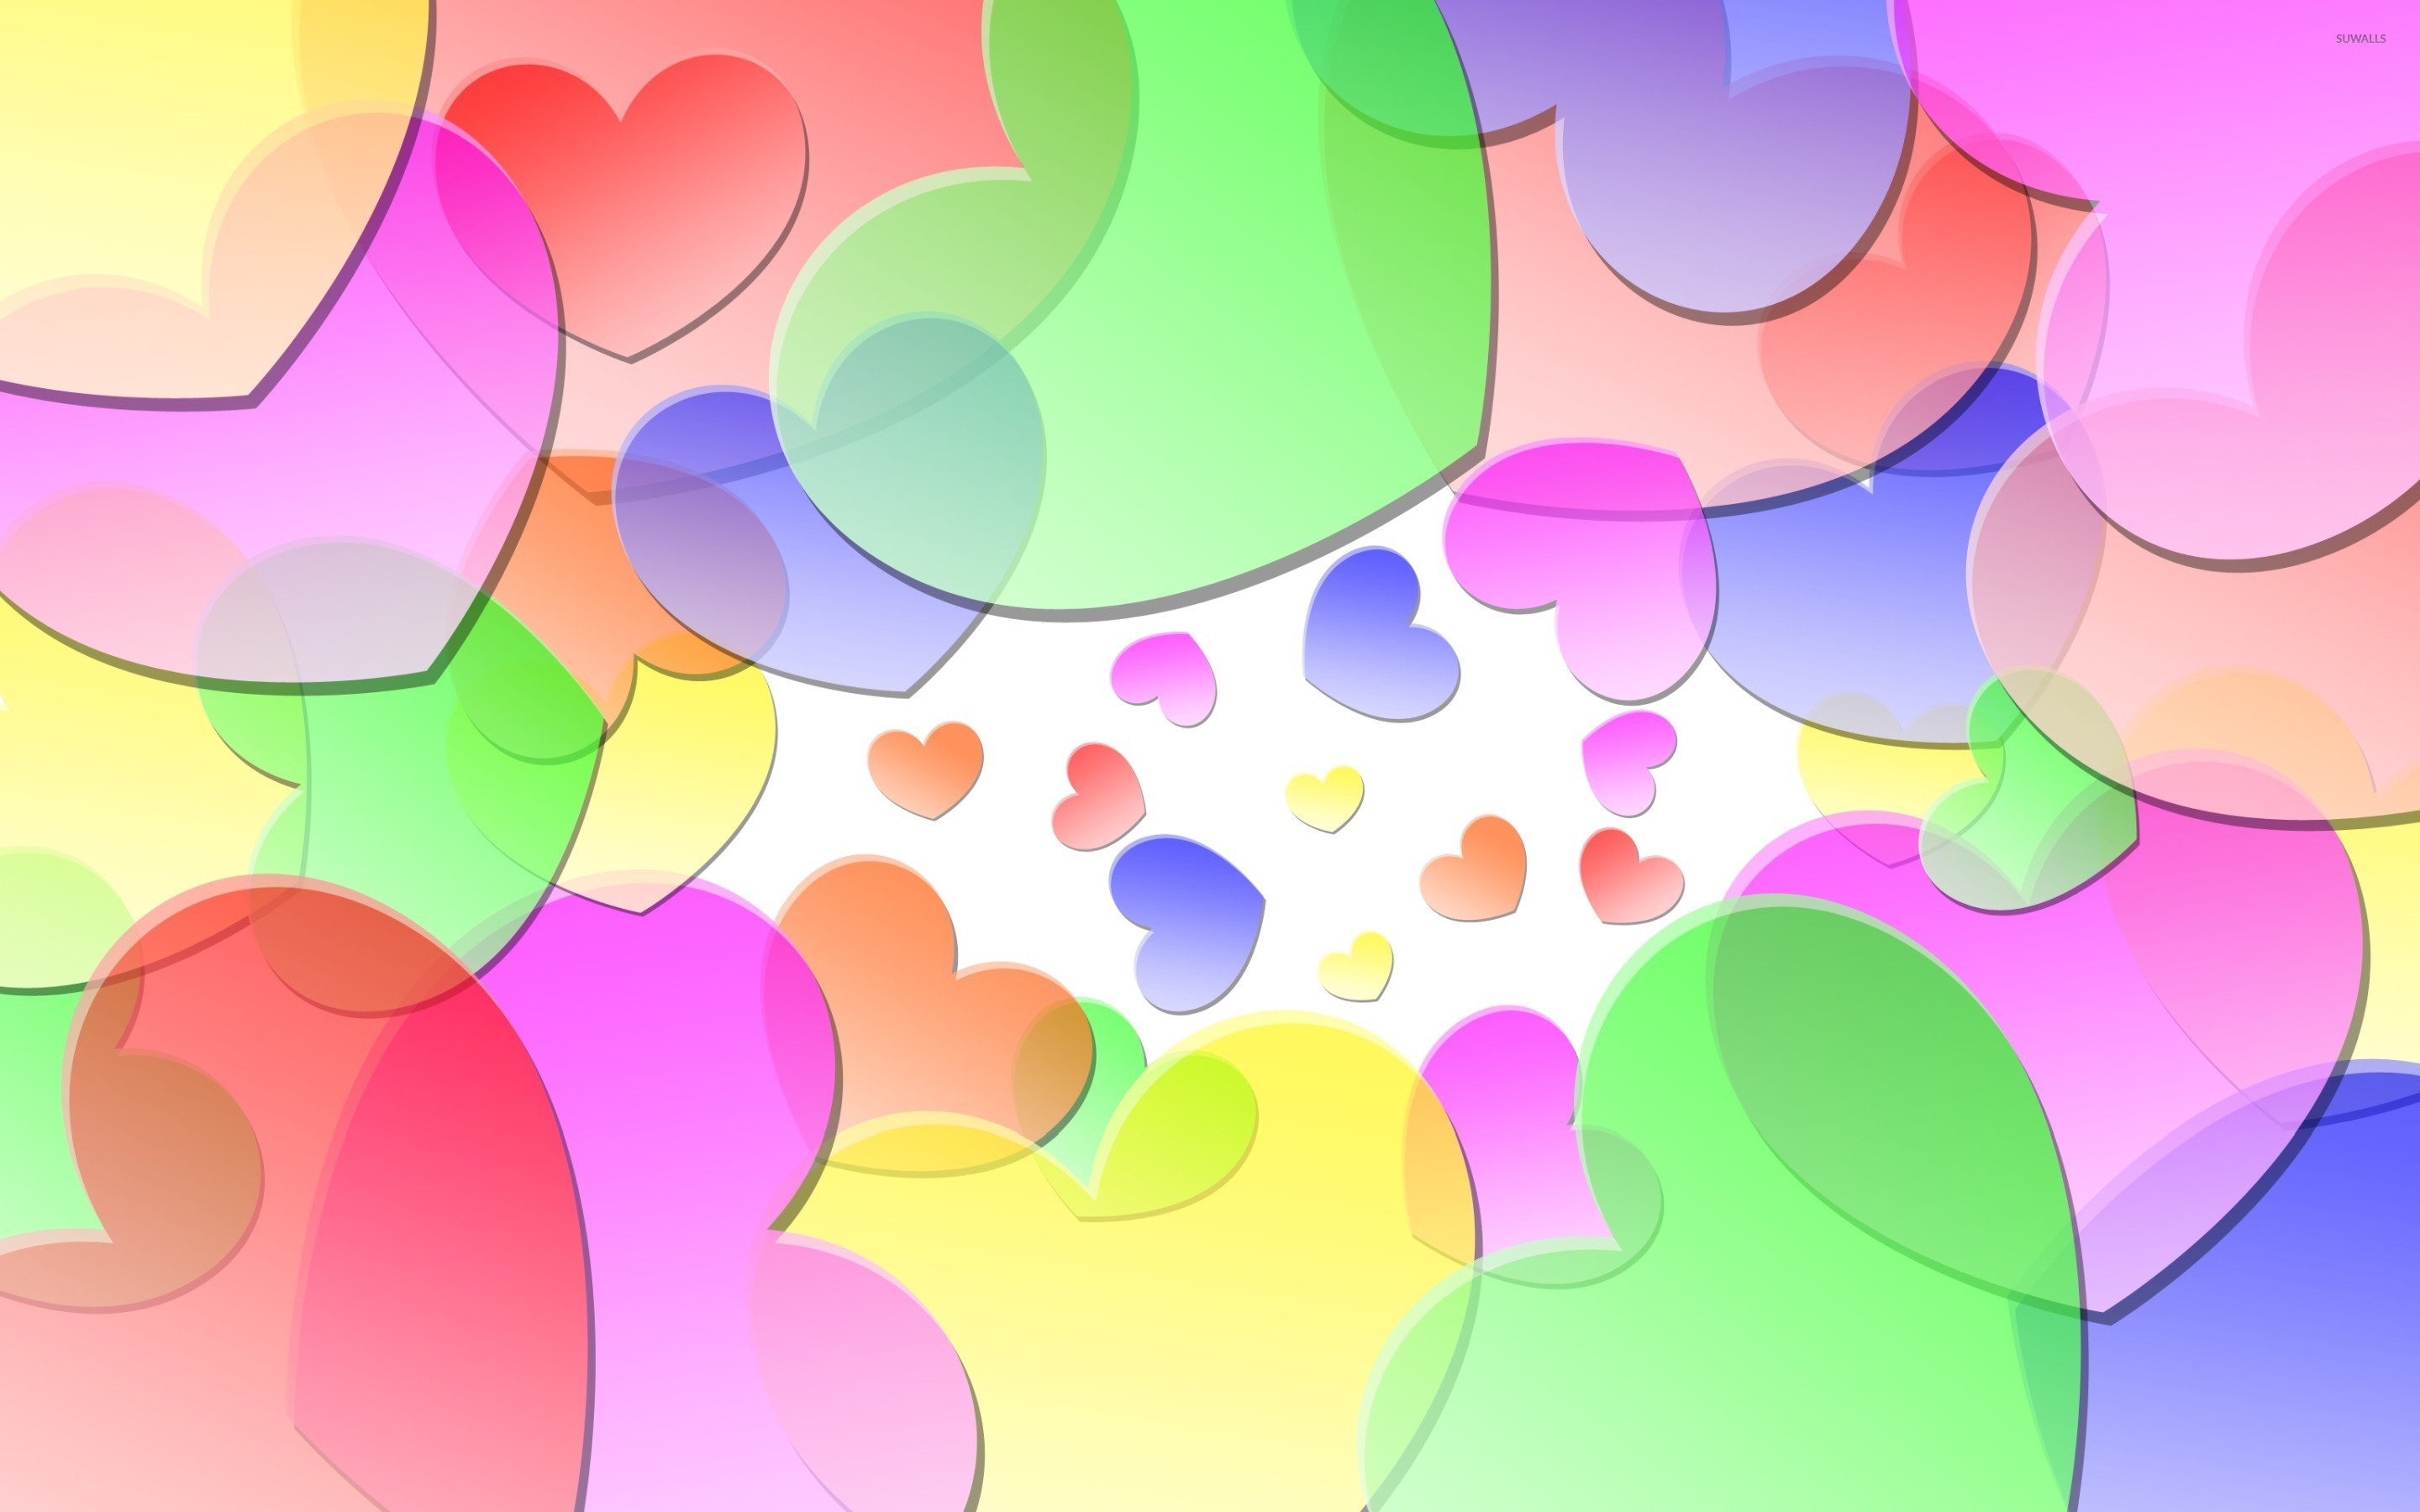 2595117 Colorful Hearts Images Stock Photos  Vectors  Shutterstock